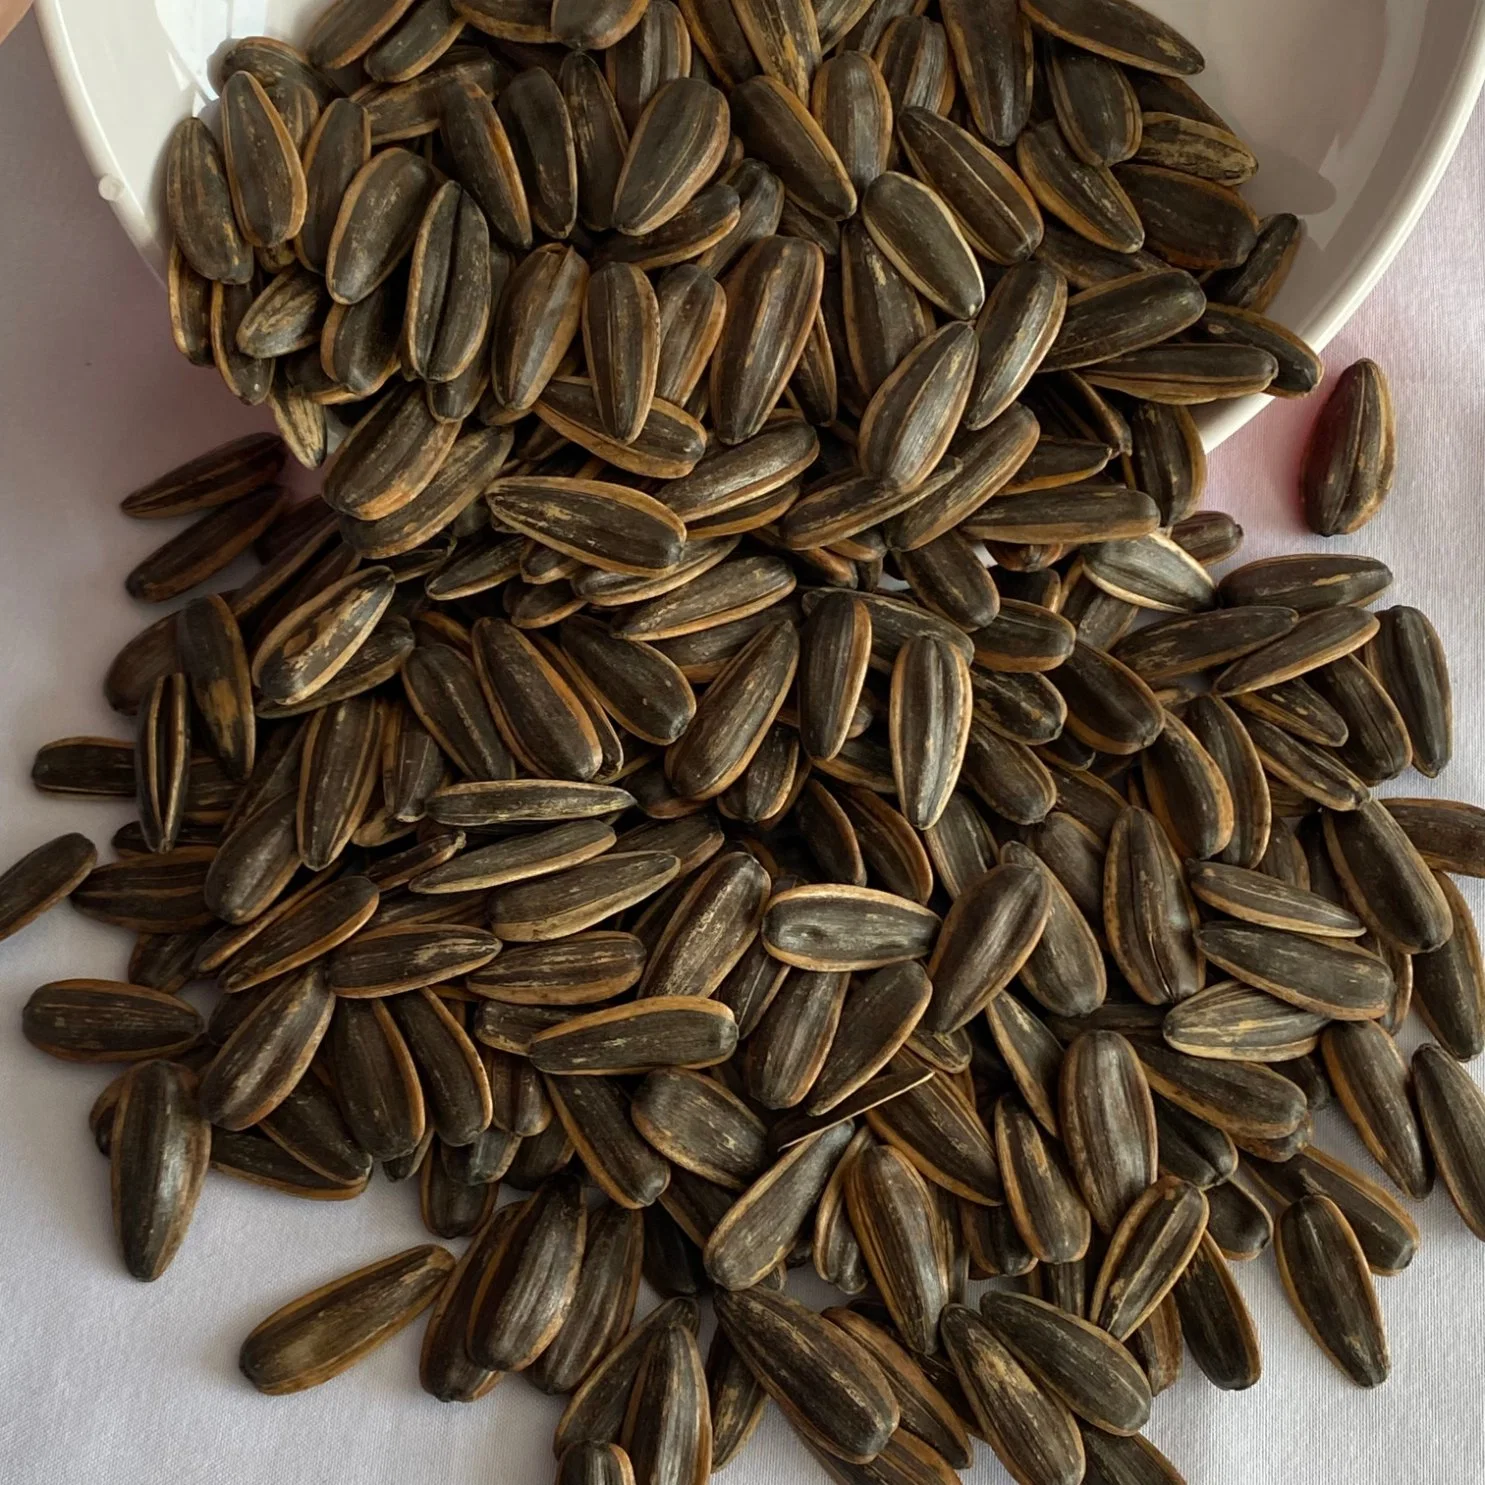 High Quality Natural Roasted Flavor Sunflower Seeds with Nature and Healthy